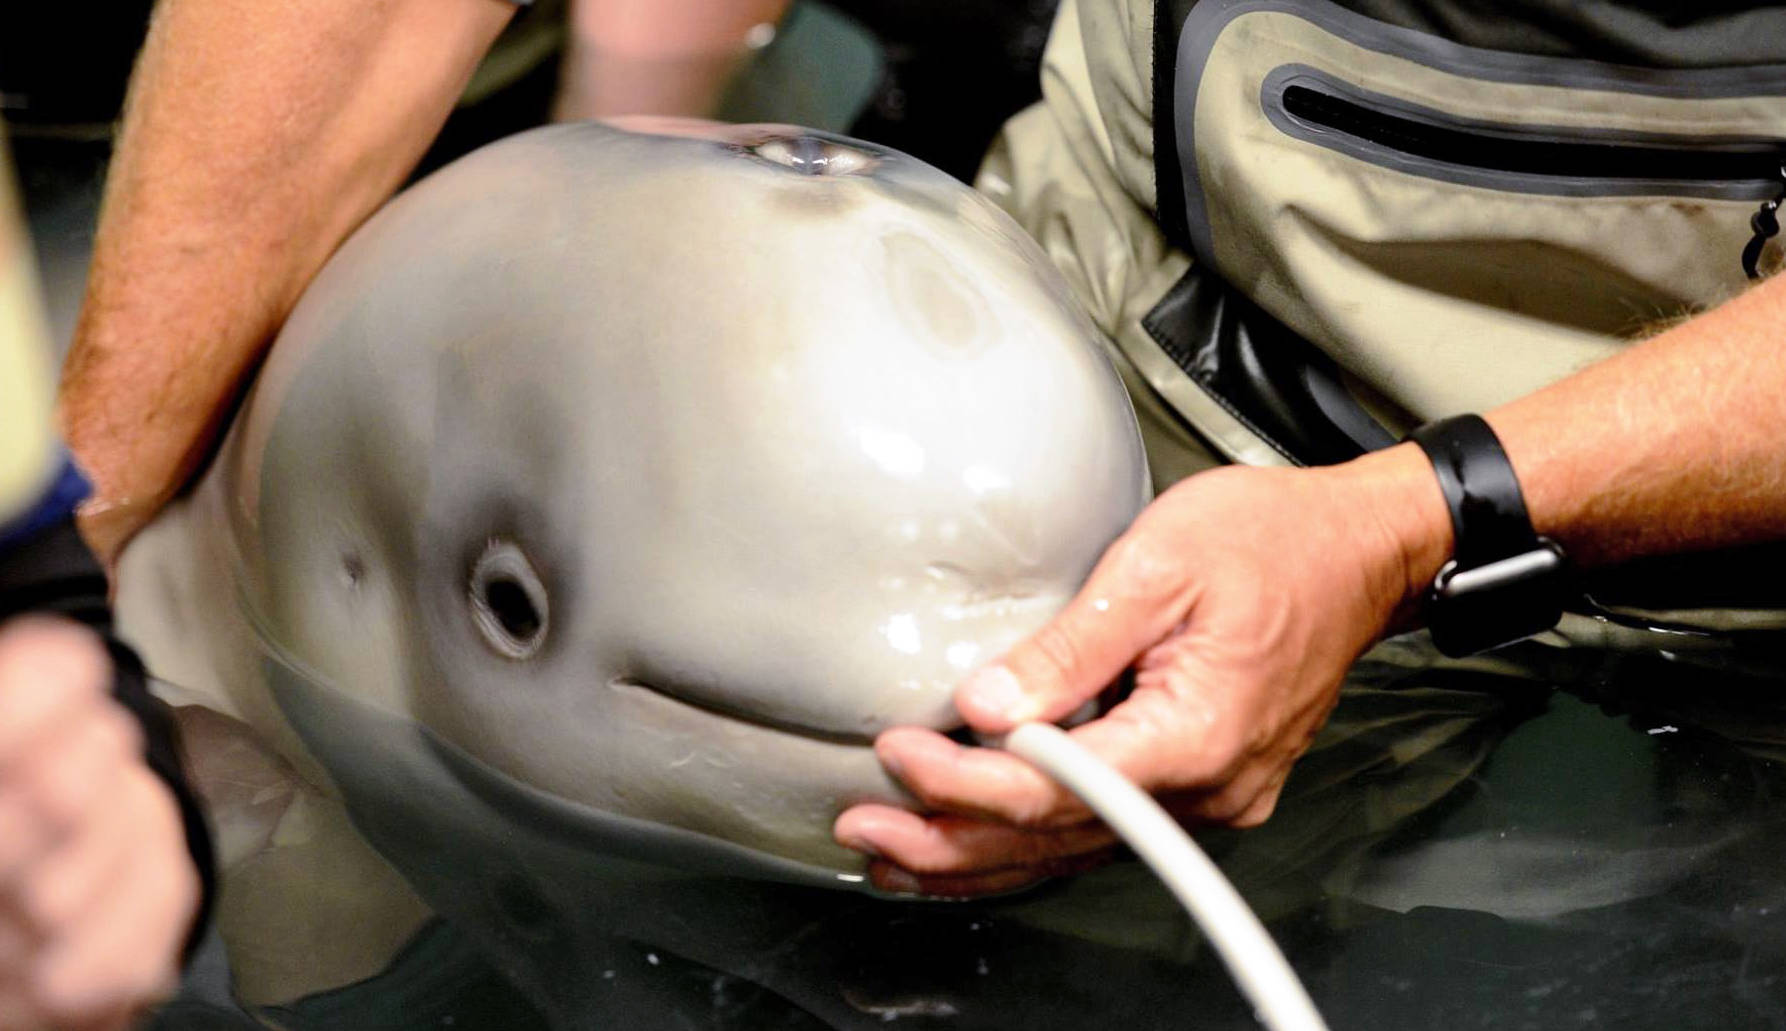 Volunteers at the Alaska SeaLife Center feed a milk and electrolyte mix to a beluga calf, rescued on Sept. 30 after being stranded in Trading Bay, by holding a tube to its lips (a method they’ve found works better than bottle-feeding) on Friday, Oct. 6 in Seward, Alaska. The calf is the first Cook Inlet beluga under human care. Activities in this picture have been authorized by NOAA’s Marine Mammal Health and Stranding Response Program under the Marine Mammal Protection Act/Endangered Species Act